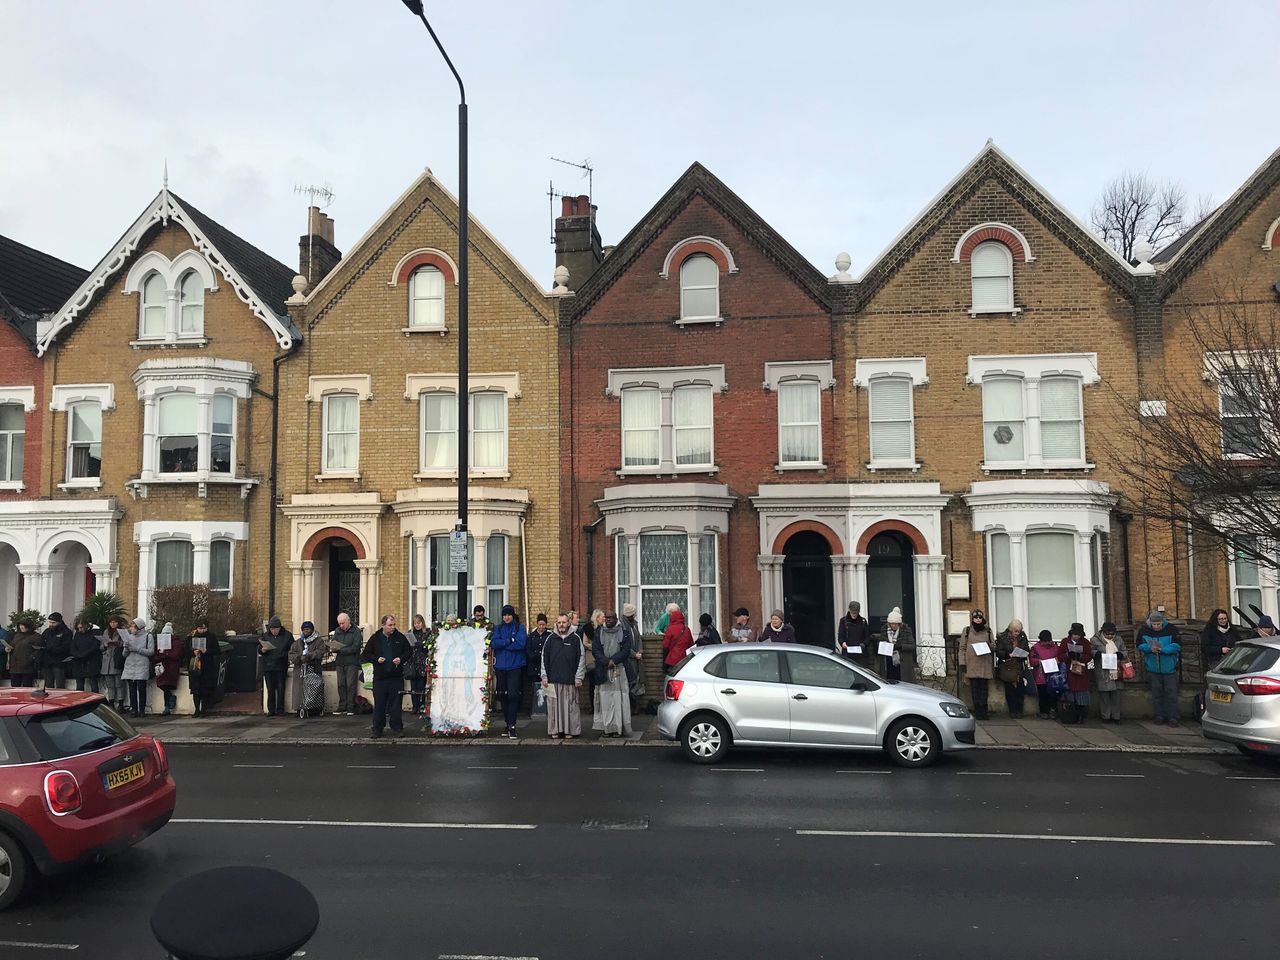 Anti-abortion protesters outside a bpas clinic in Finsbury Park, London, at the start of February. It is one of around 46 clinics which have been targeted by activists in the last 18 months. 